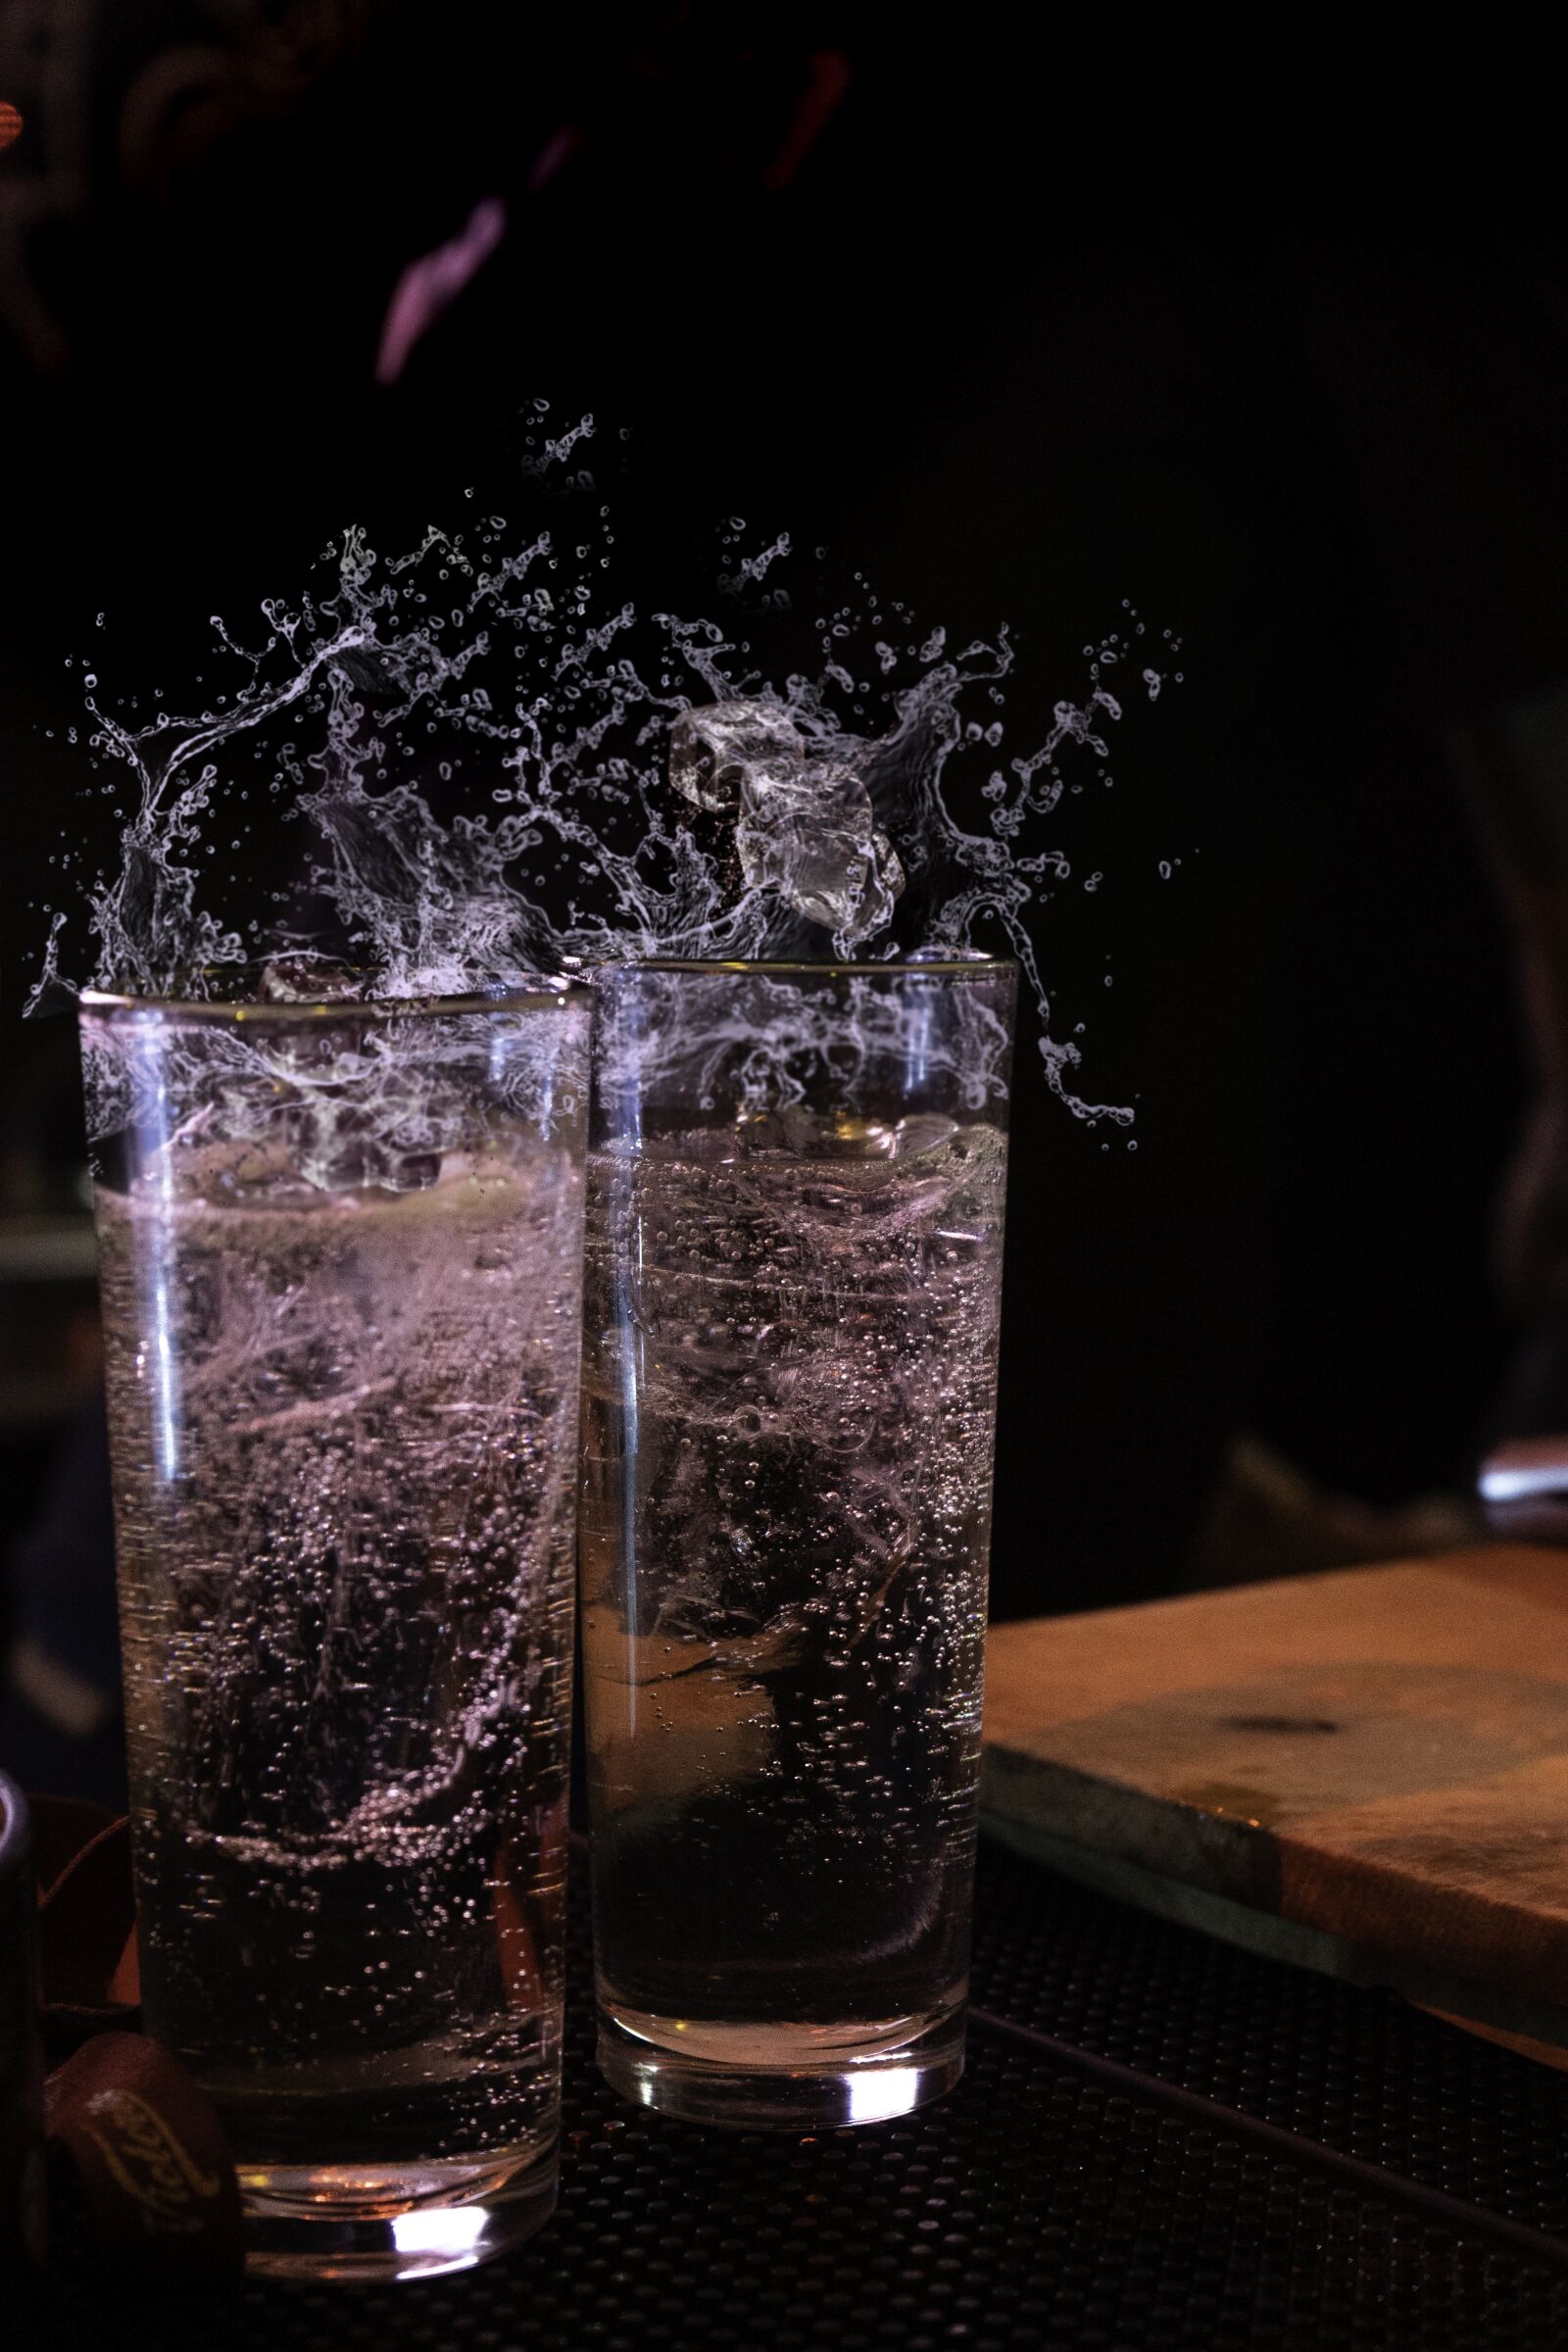 Sony a7 III sample photo. Drink, cocktail, tonic photography